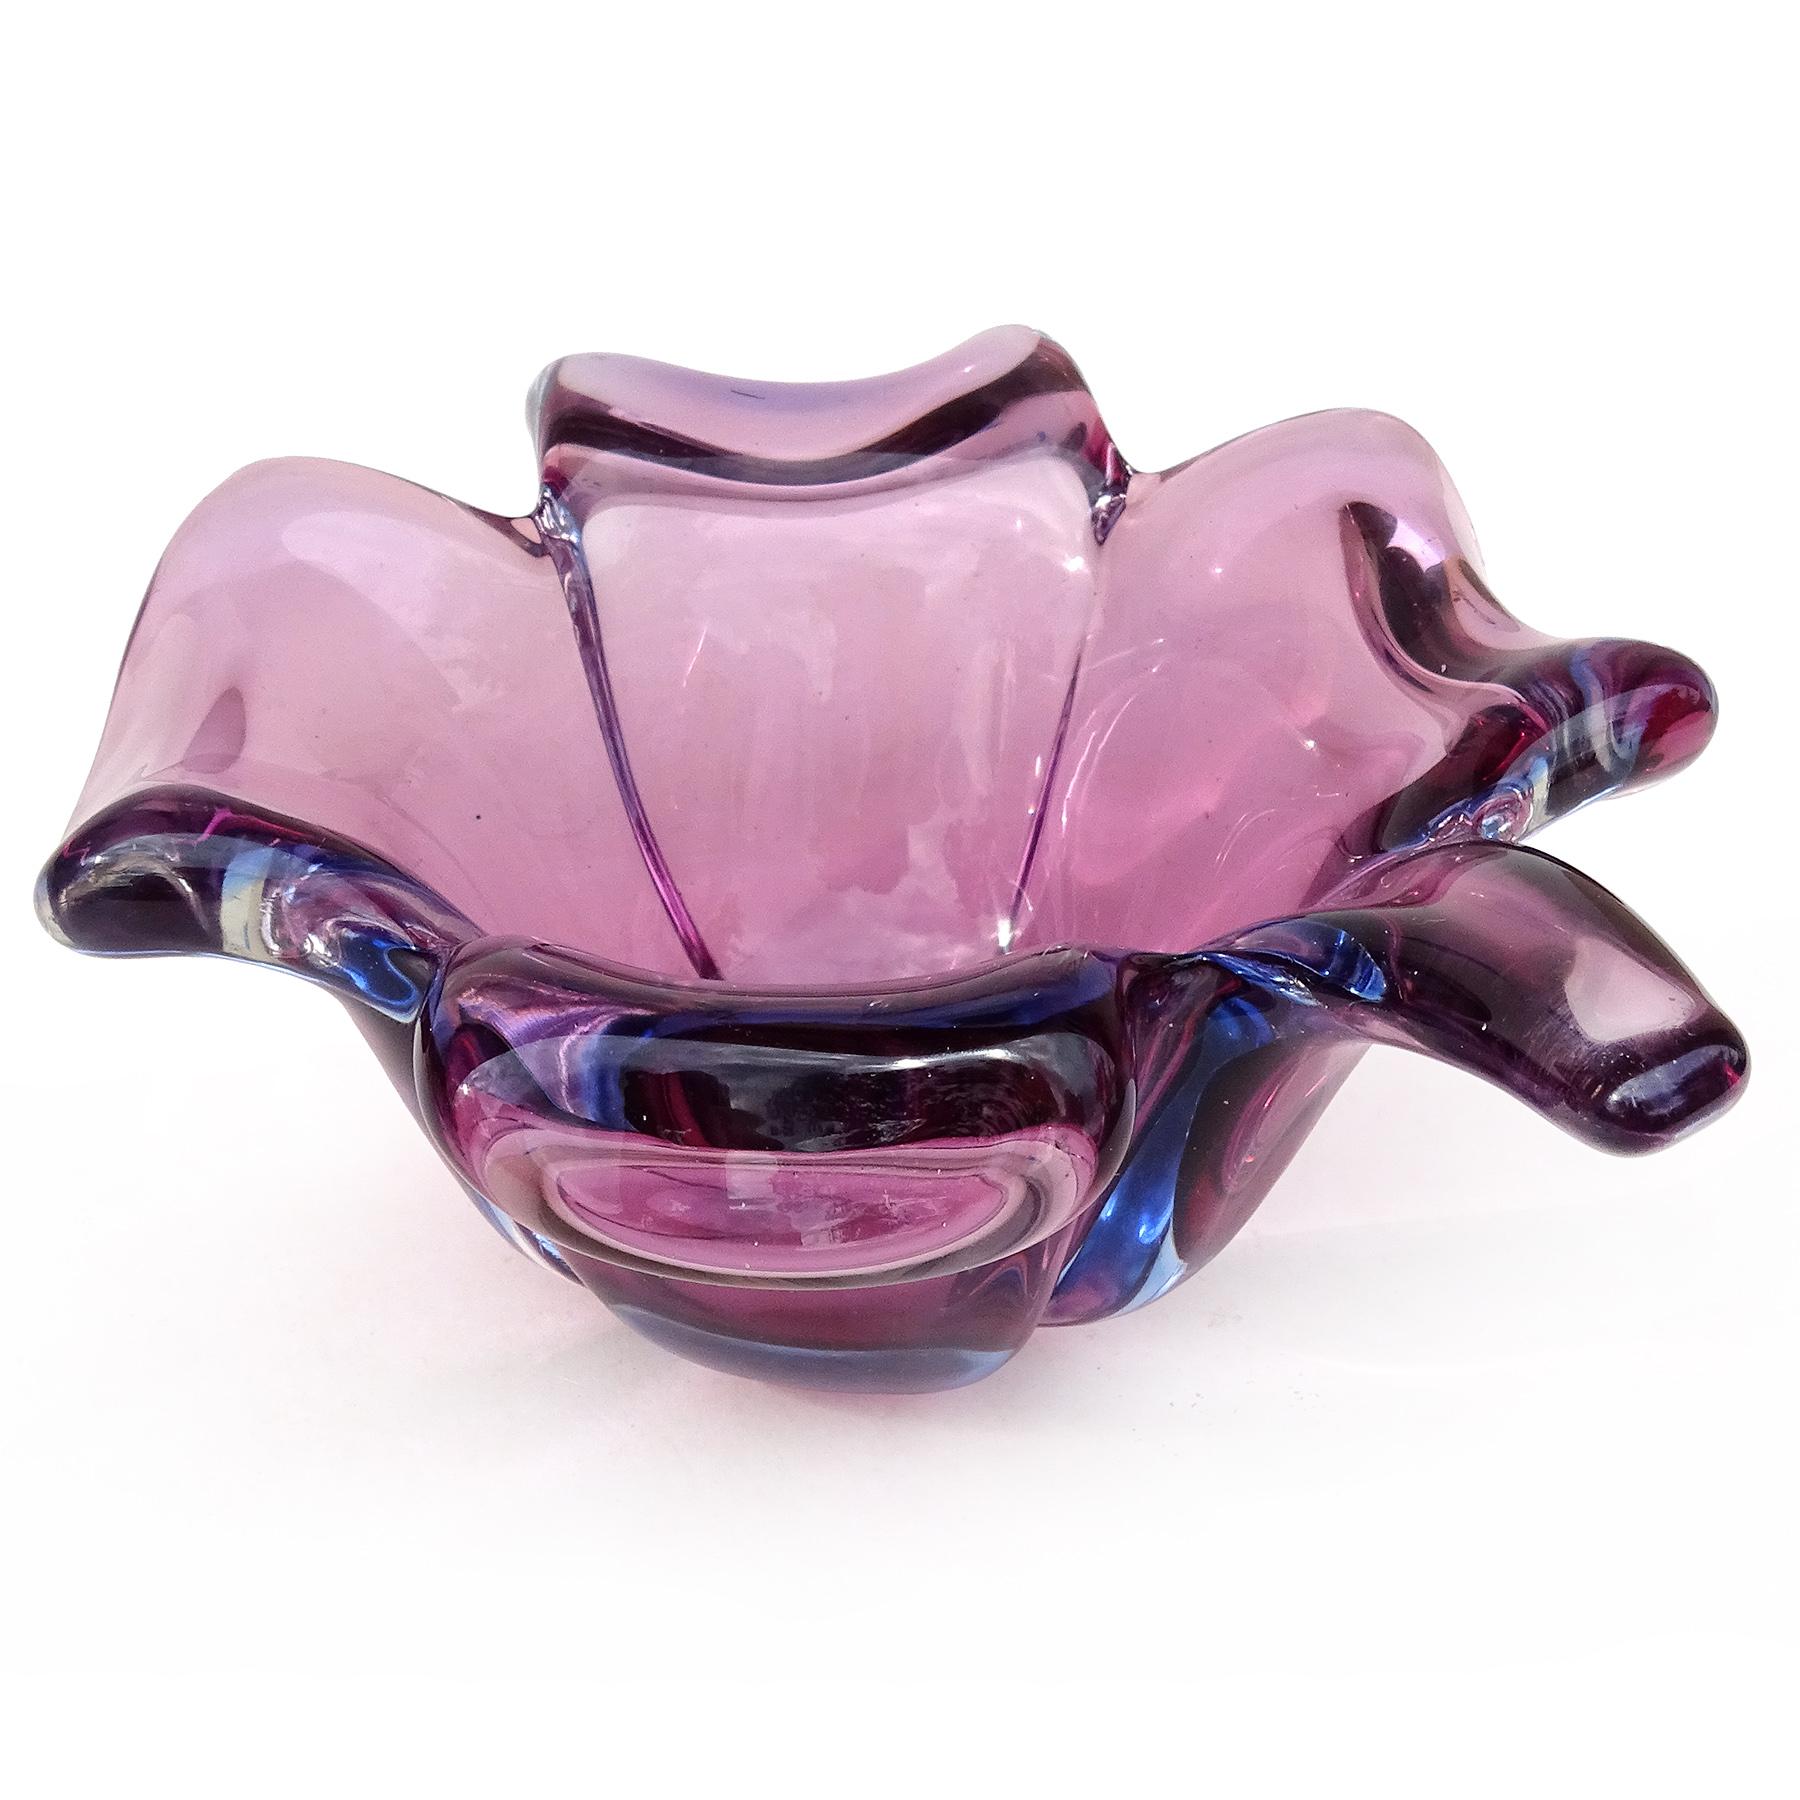 Beautiful vintage Murano hand blown Sommerso purple and blue Italian art glass 4 leaf clover shaped bowl, trinket / ring dish. Attributed to designer Alfredo Barbini, circa 1950-1960. The bowl has big folded over petals, with a stem that can be used